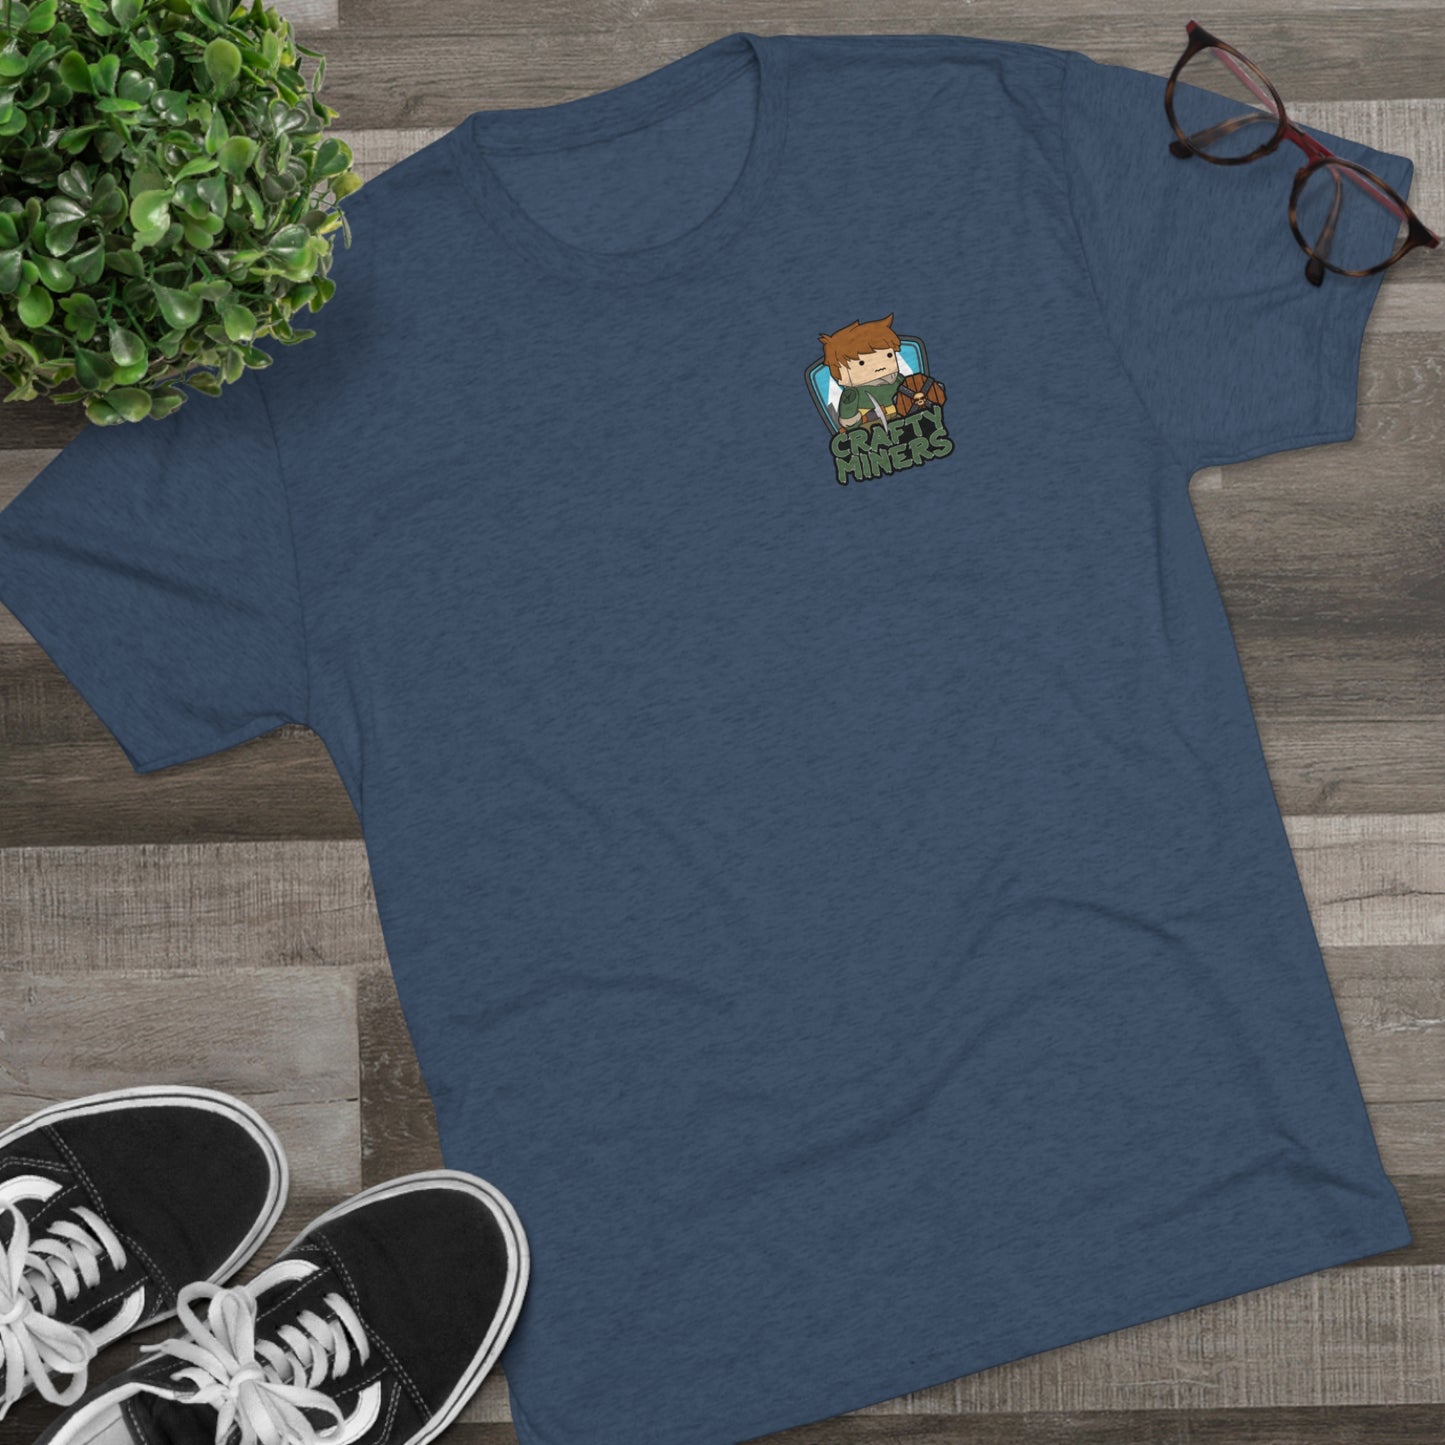 Crafty Miners Let's Go! Unisex Tri-Blend Crew Tee